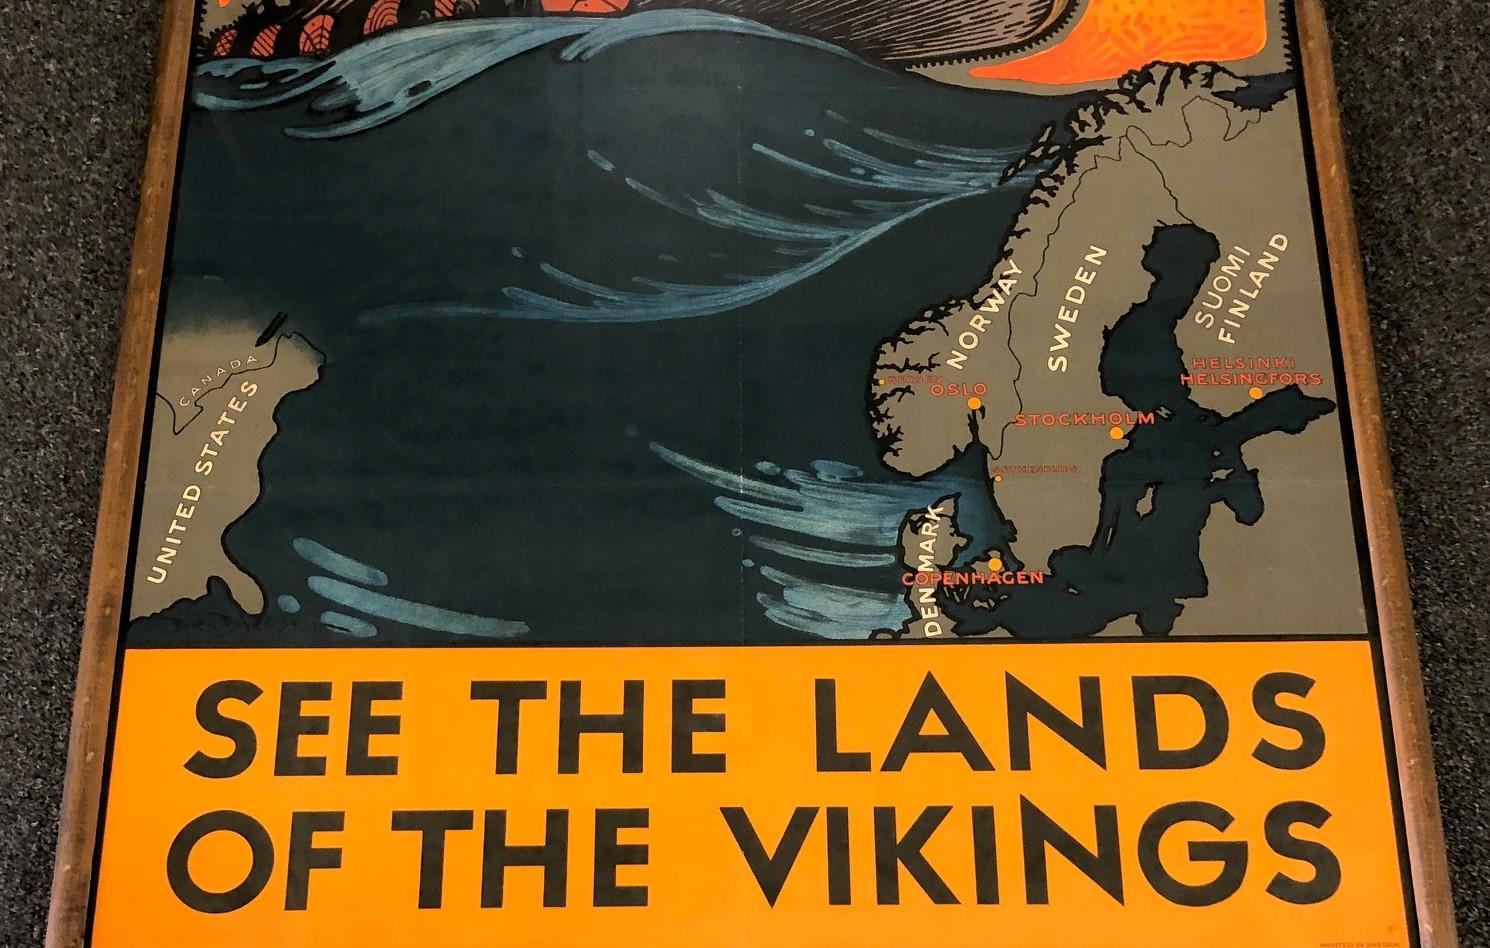 Paper Vintage Travel Poster 'See the Land of the Vikings' by Ben Blessum, 1937